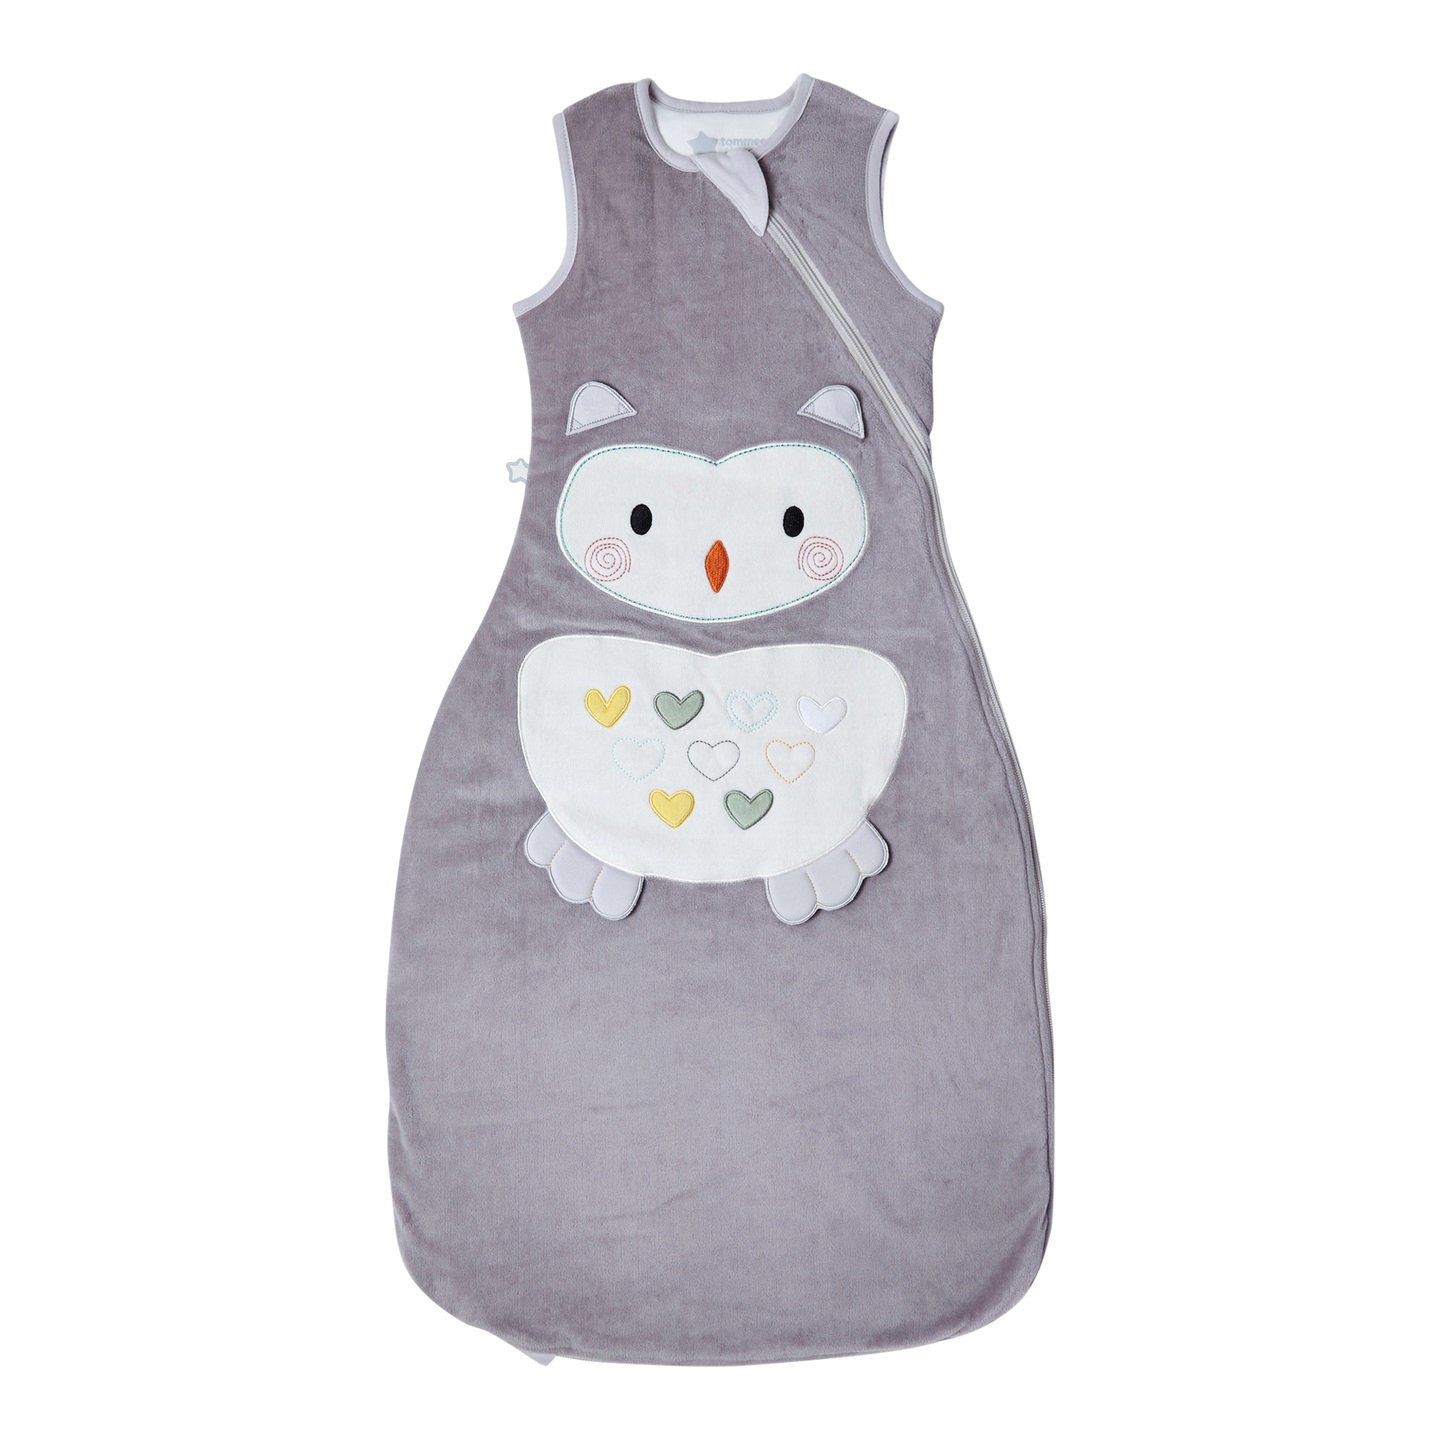 Tommee Tippee Baby Sleep Bag, 18-36m, 1 Tog, Ollie the Owl Review